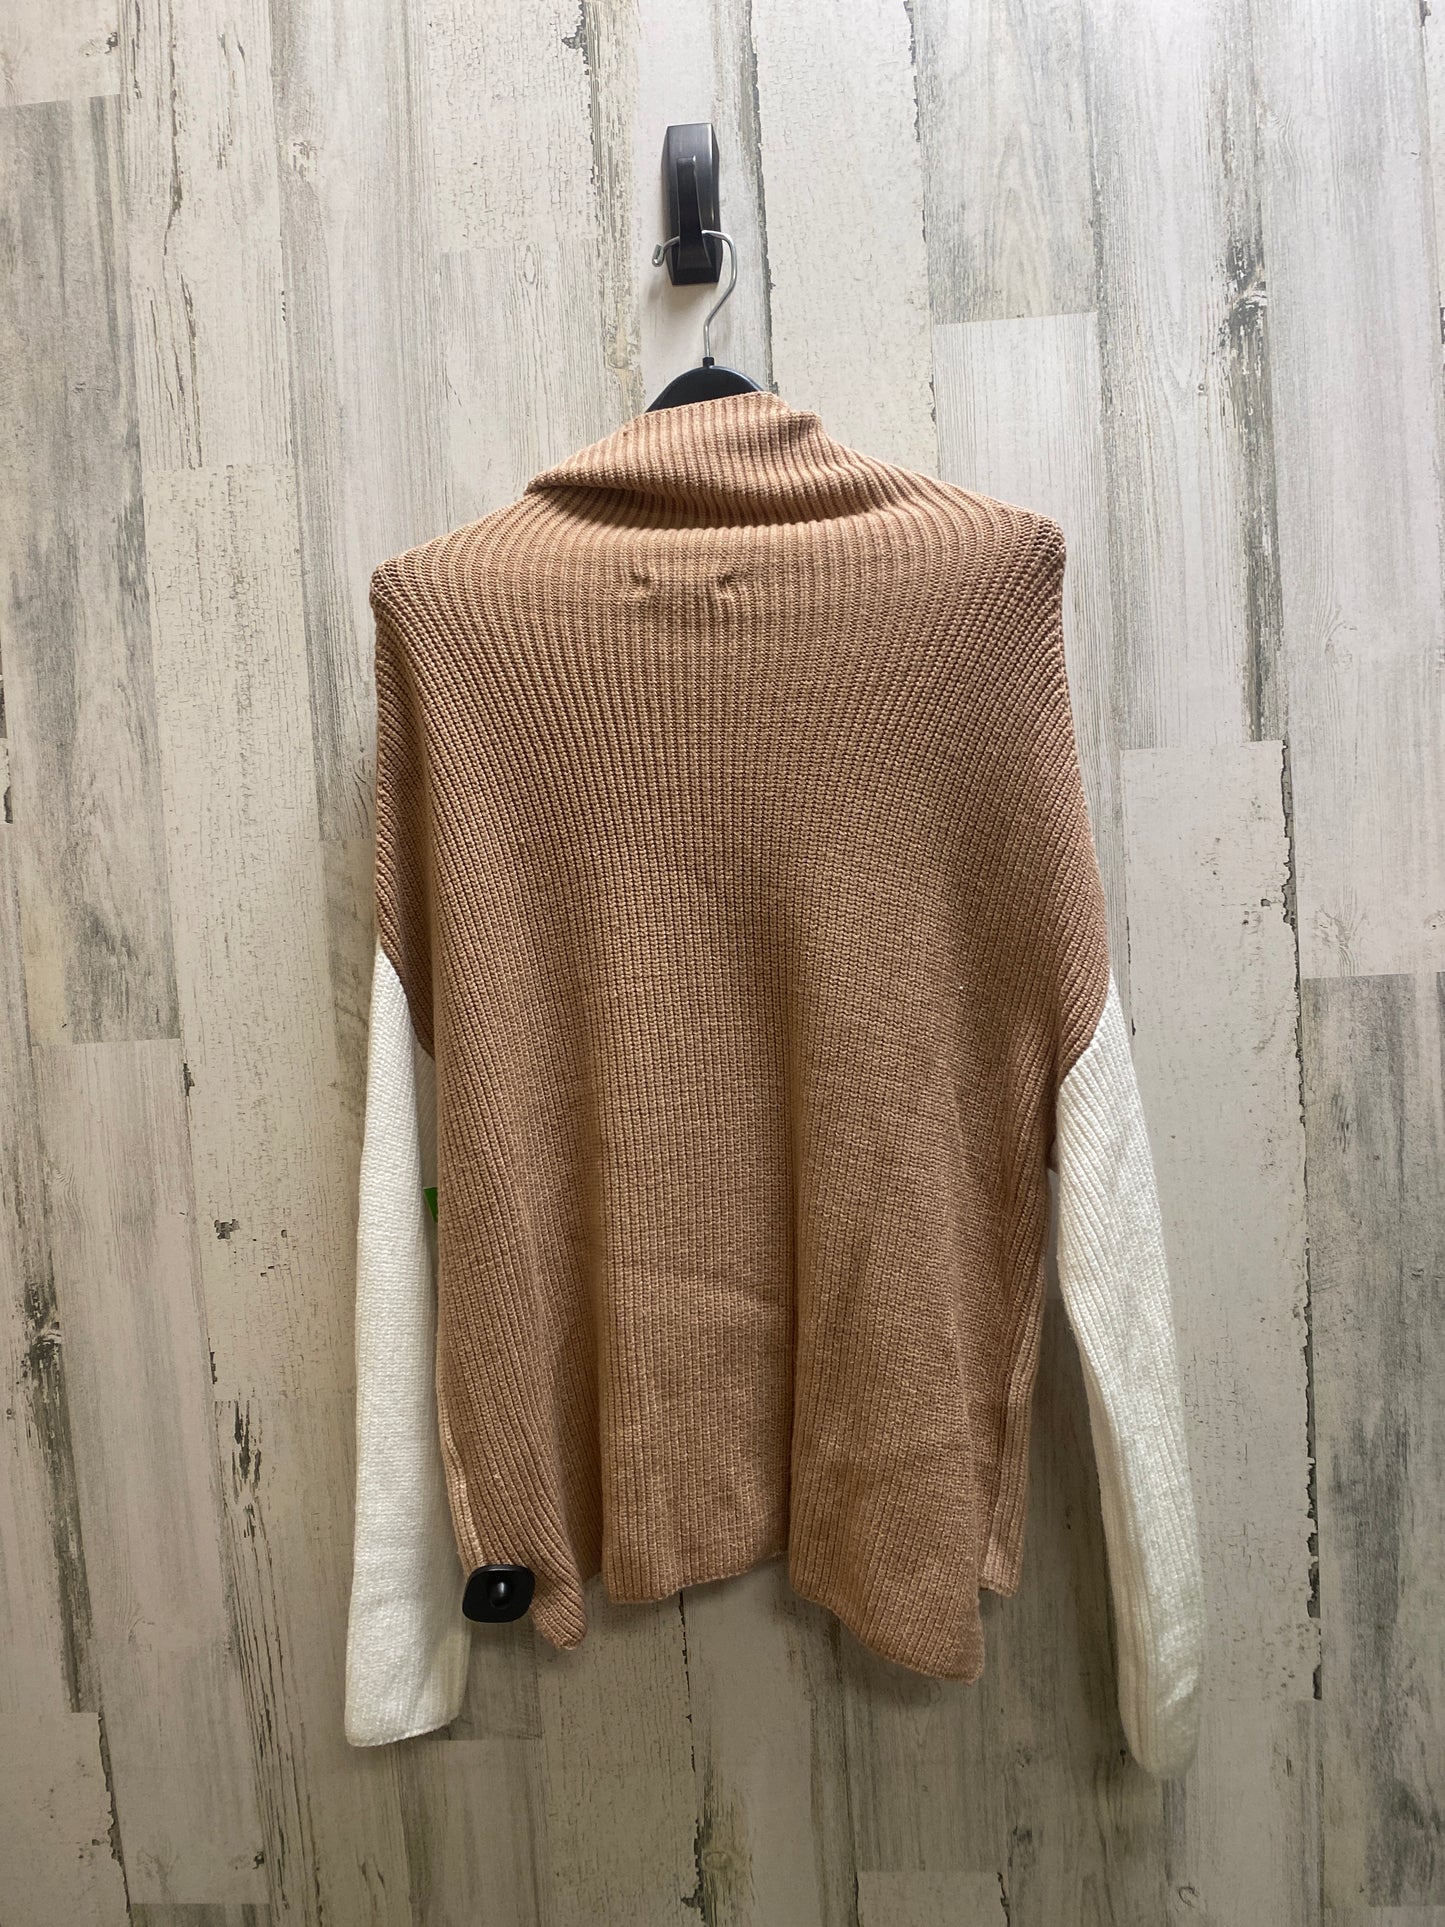 Sweater By Miracle  Size: L